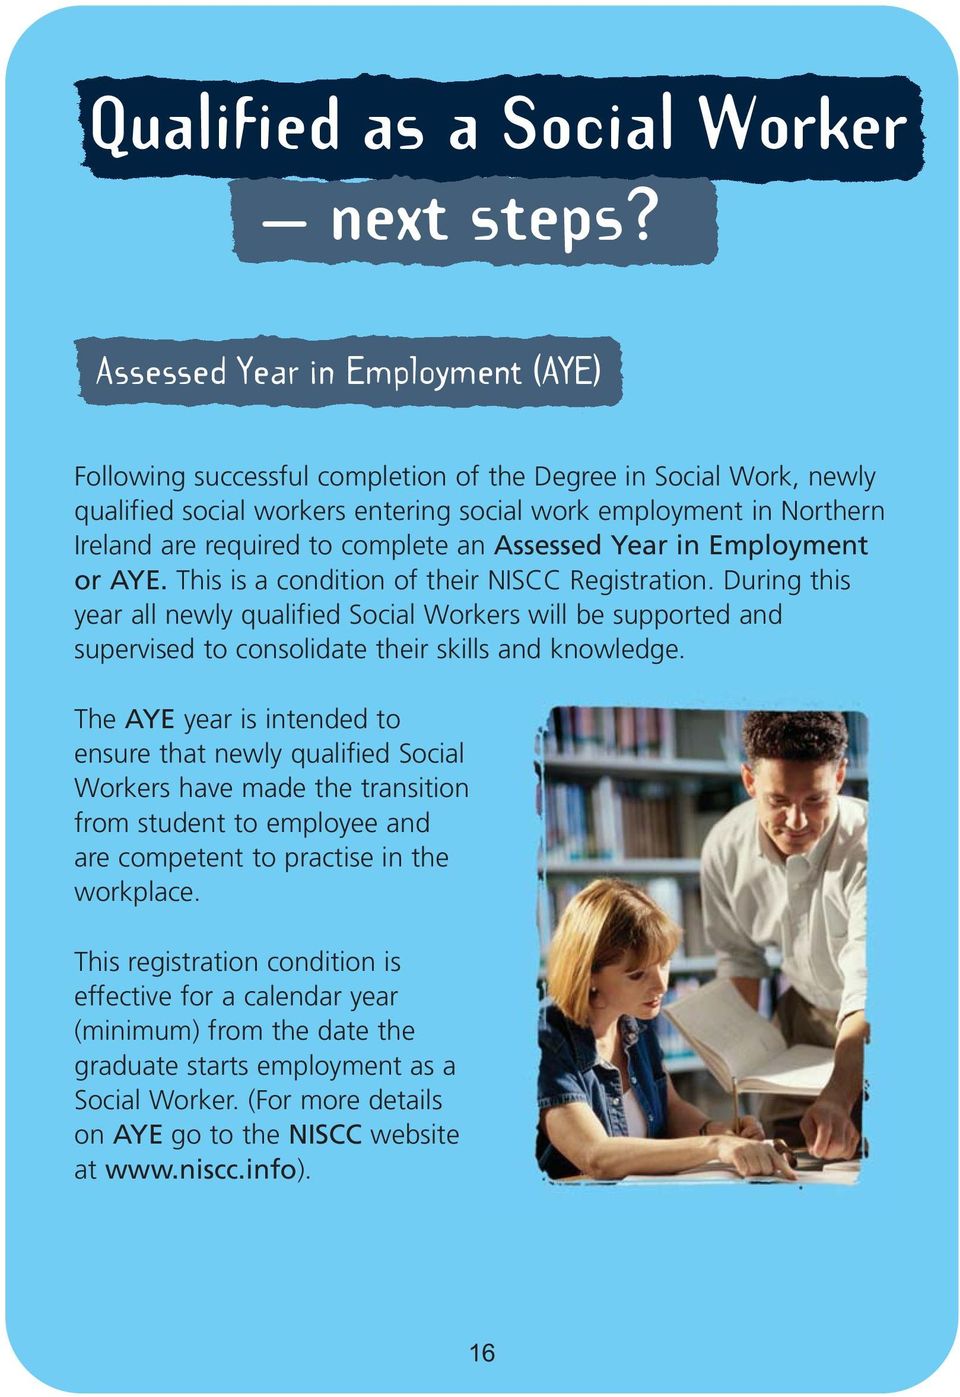 complete an Assessed Year in Employment or AYE. This is a condition of their NISCC Registration.